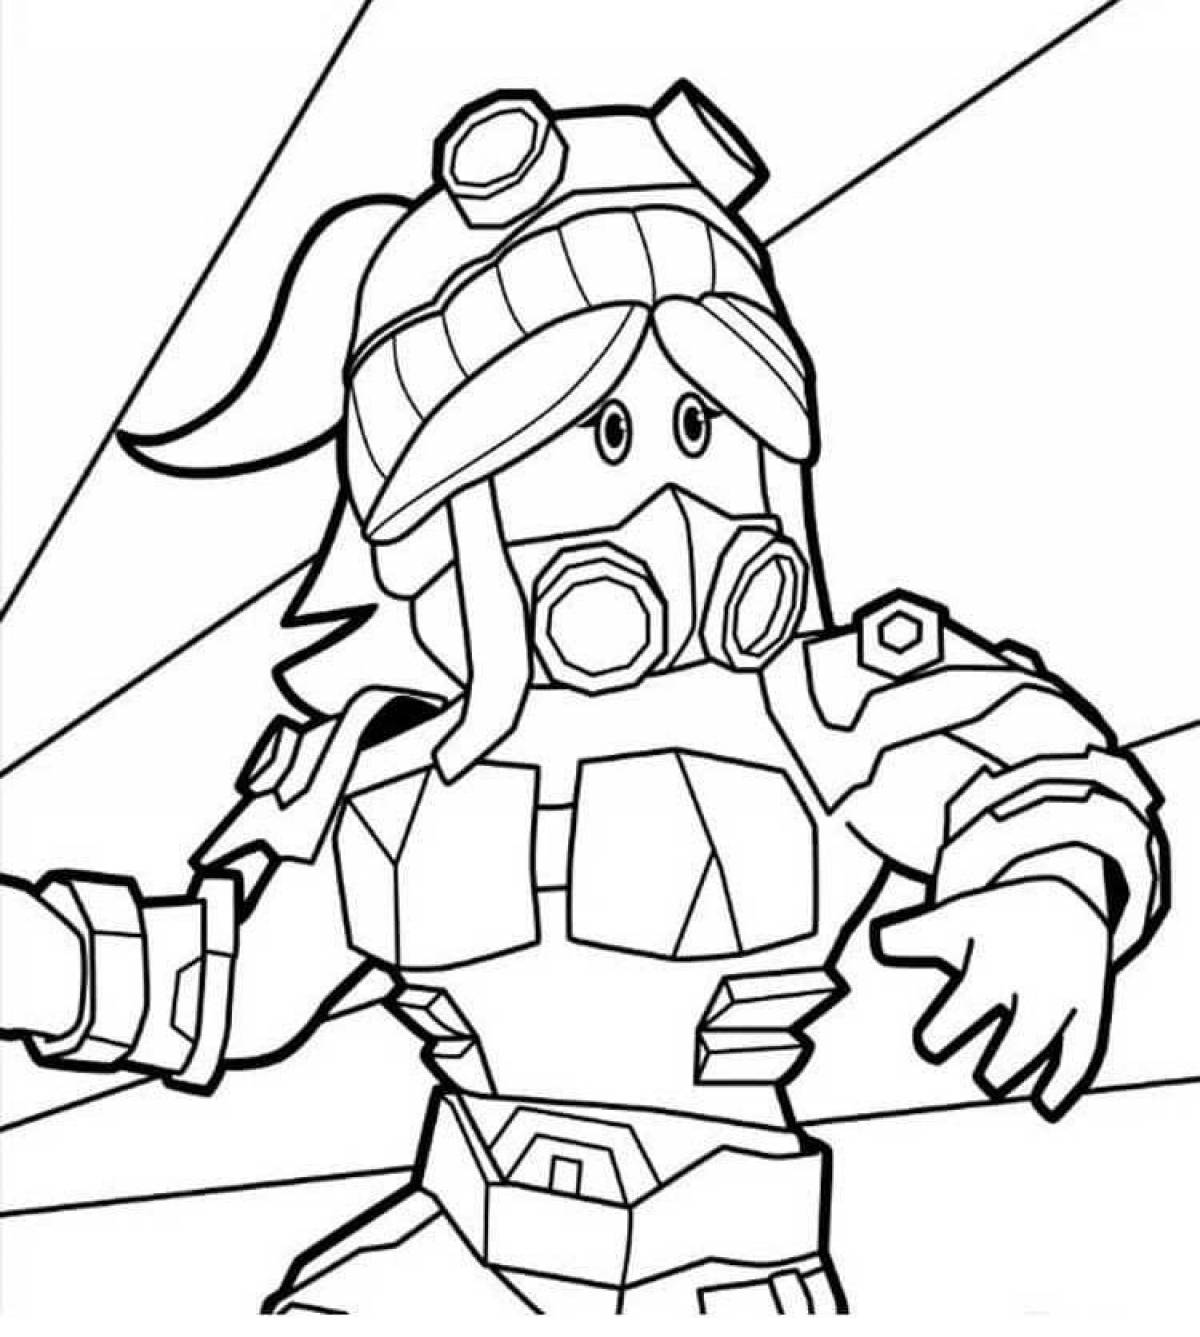 Roblox awesome door coloring pages